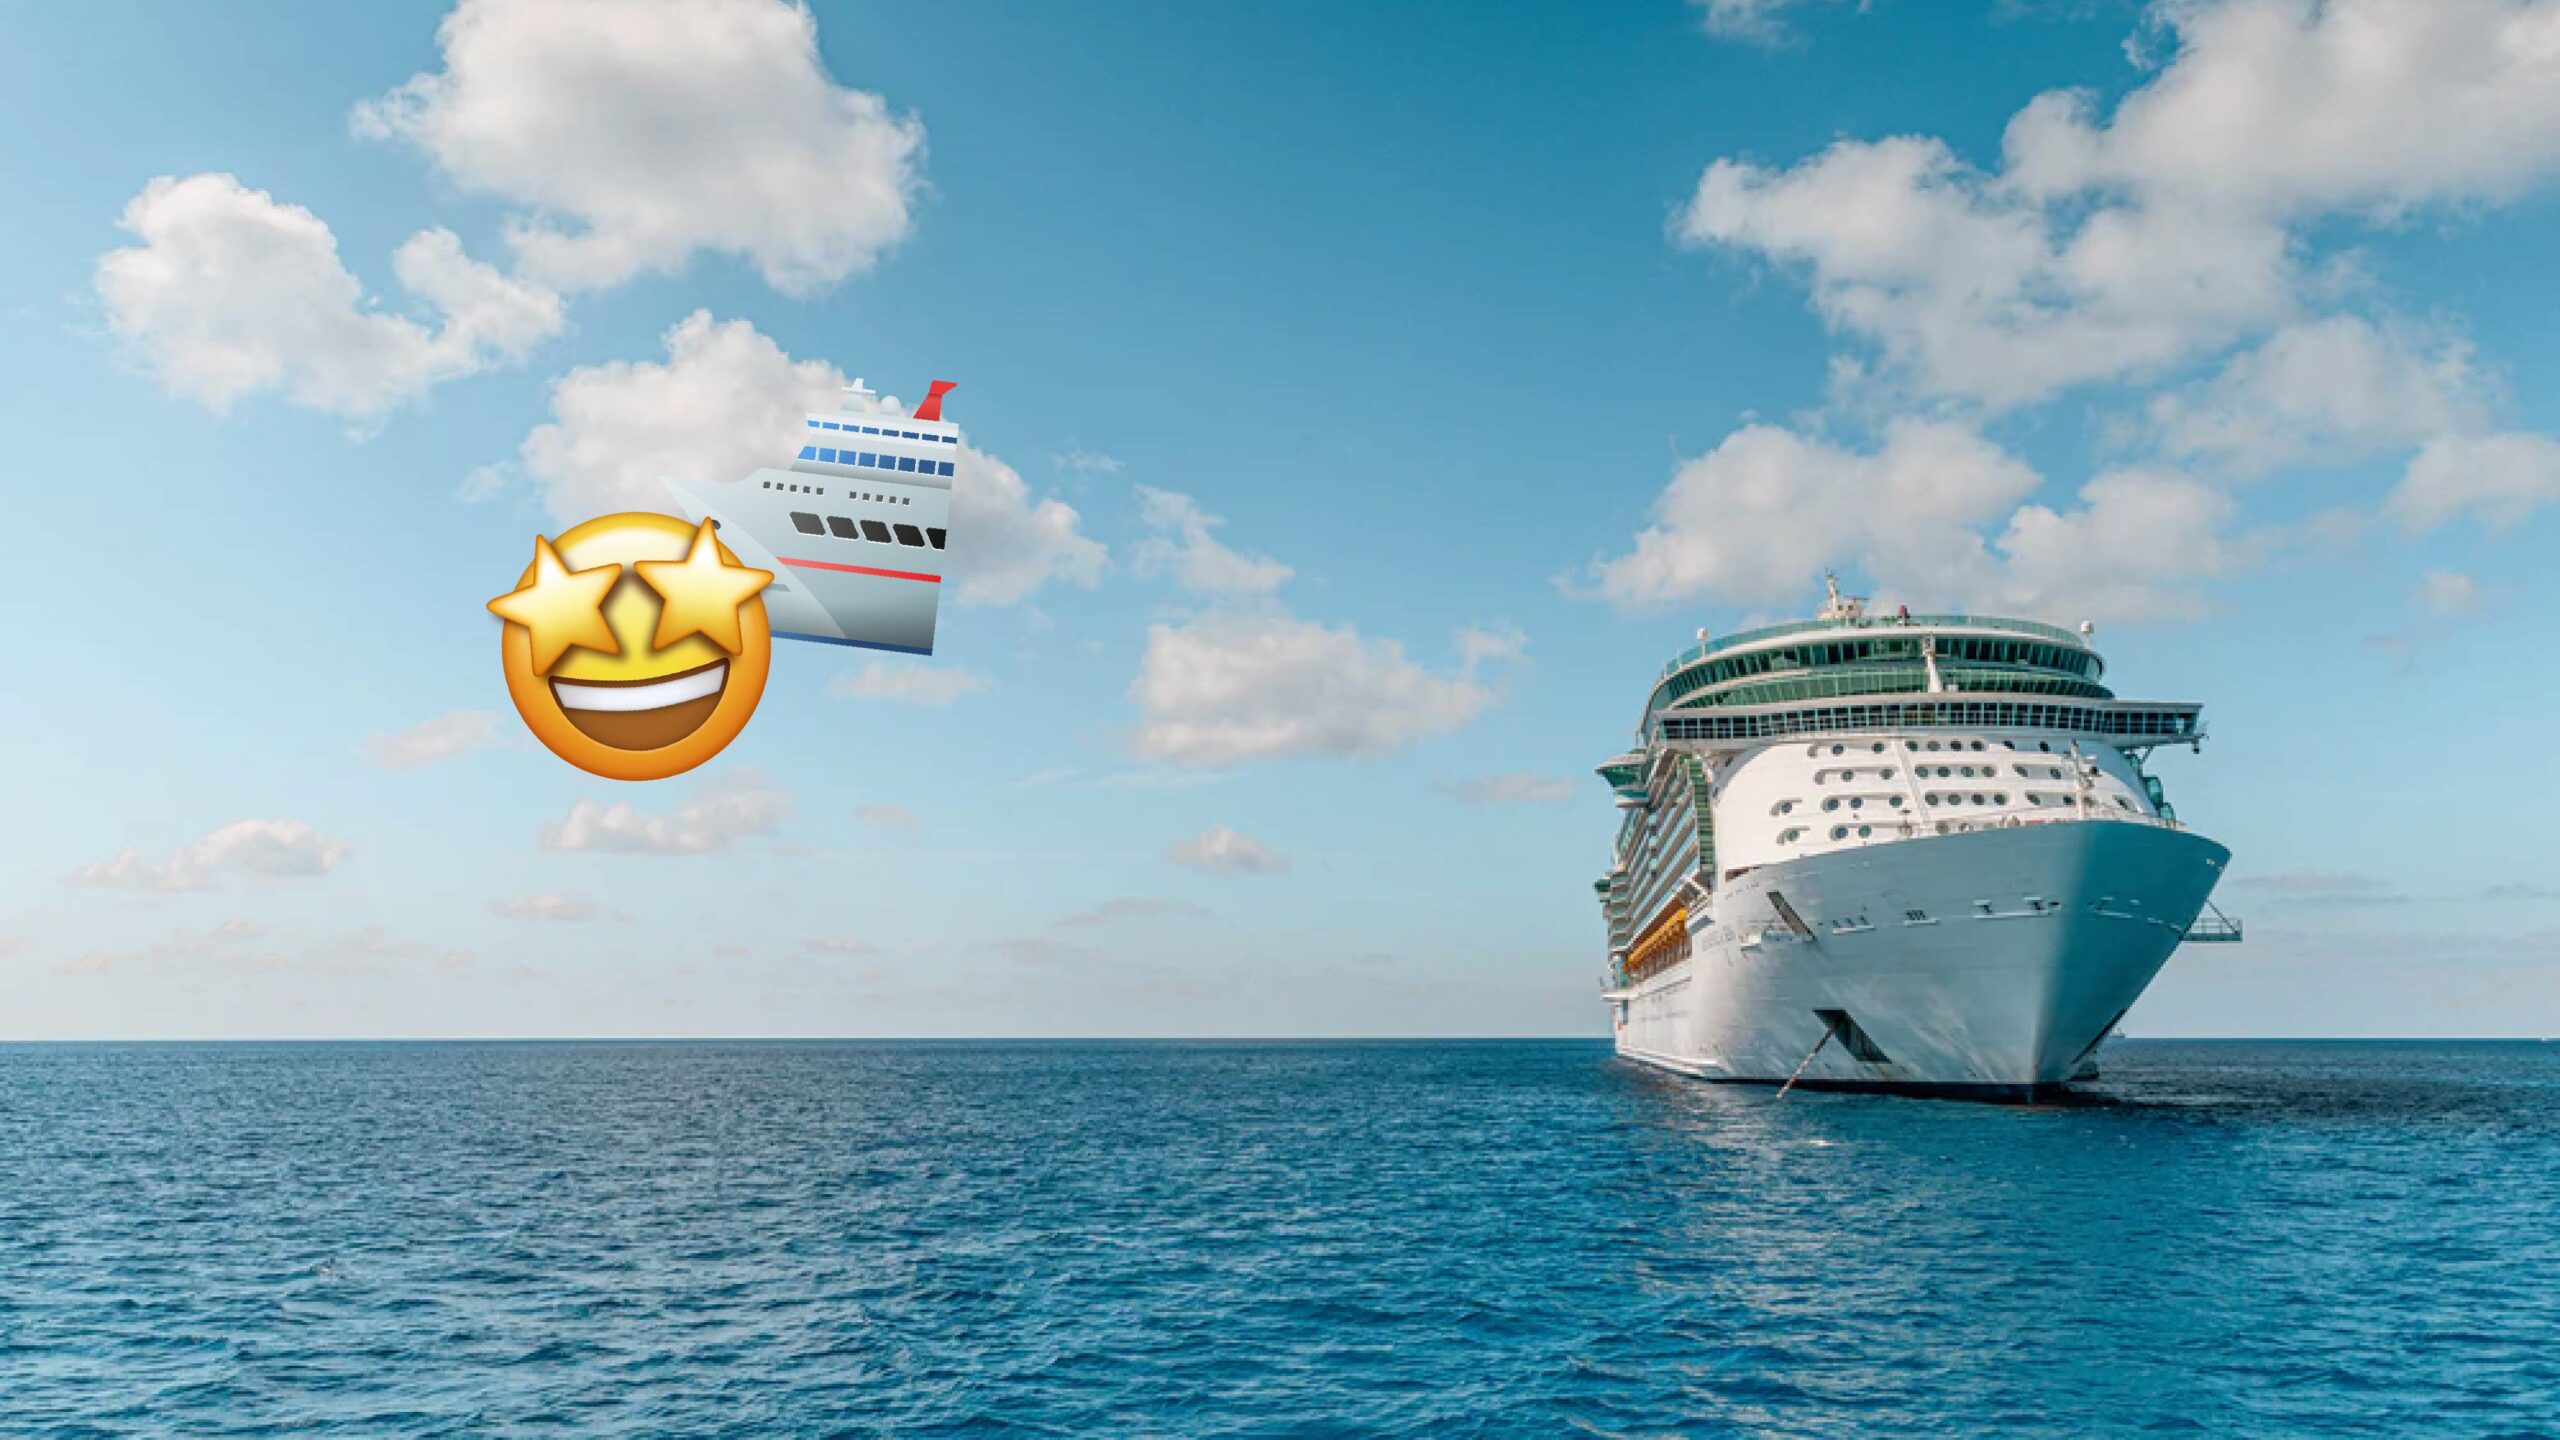 This luxurious 10day mystery cruise is going viral and here's why